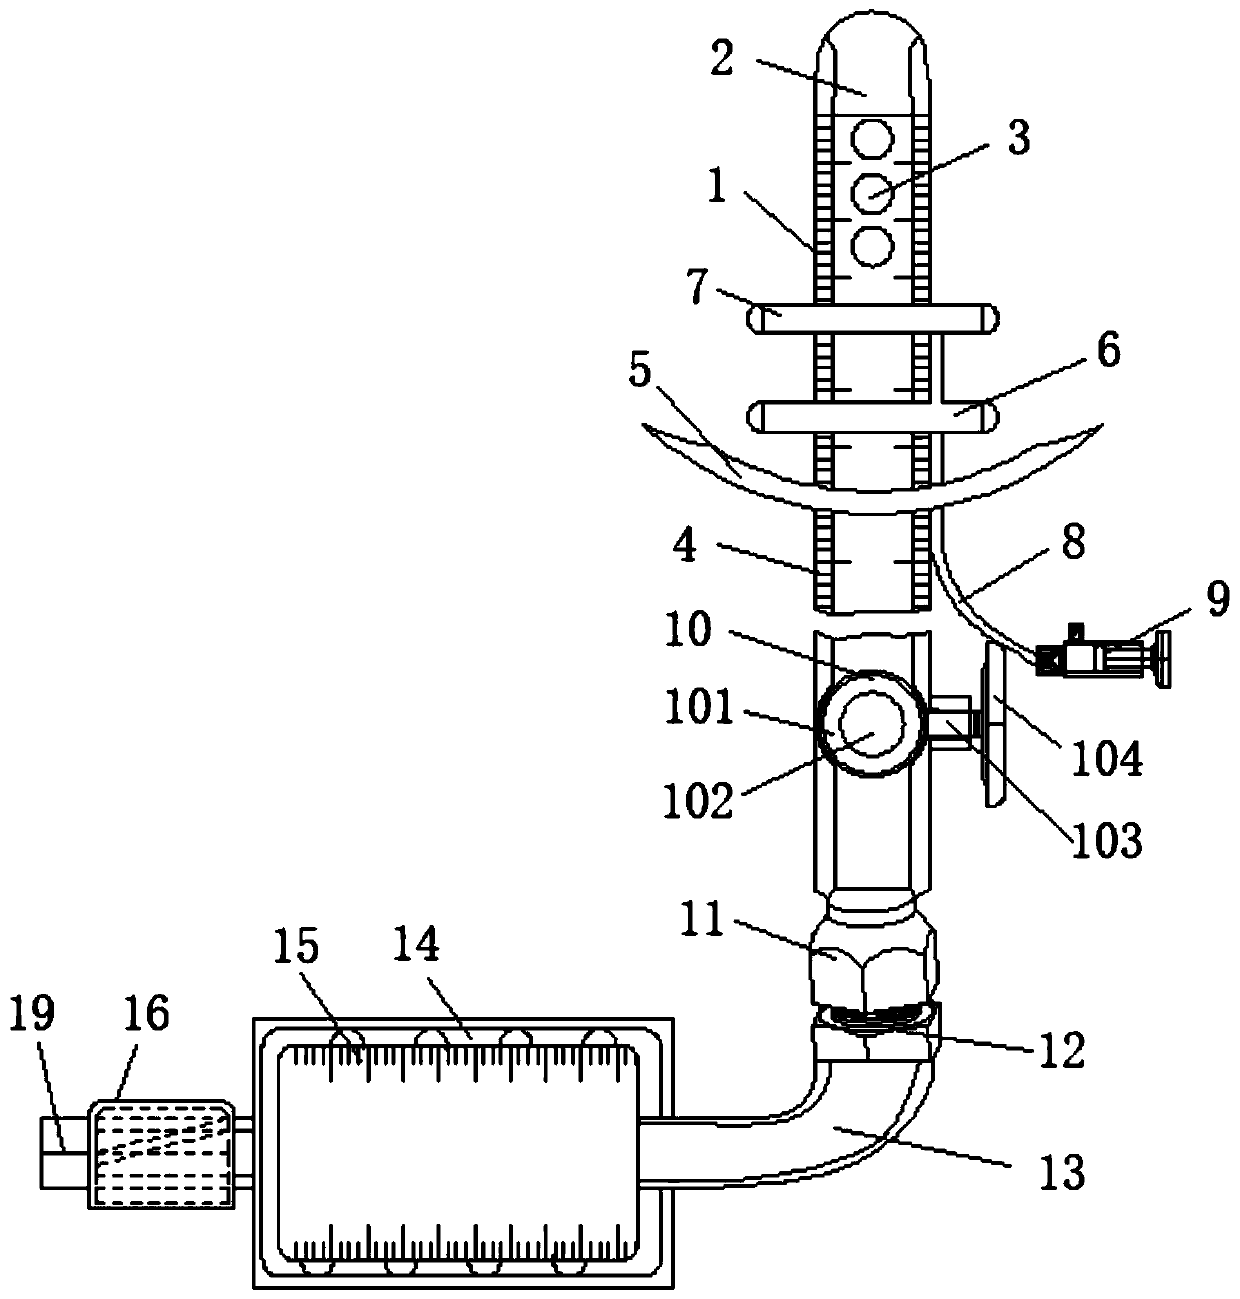 Fecal incontinence drainage control device